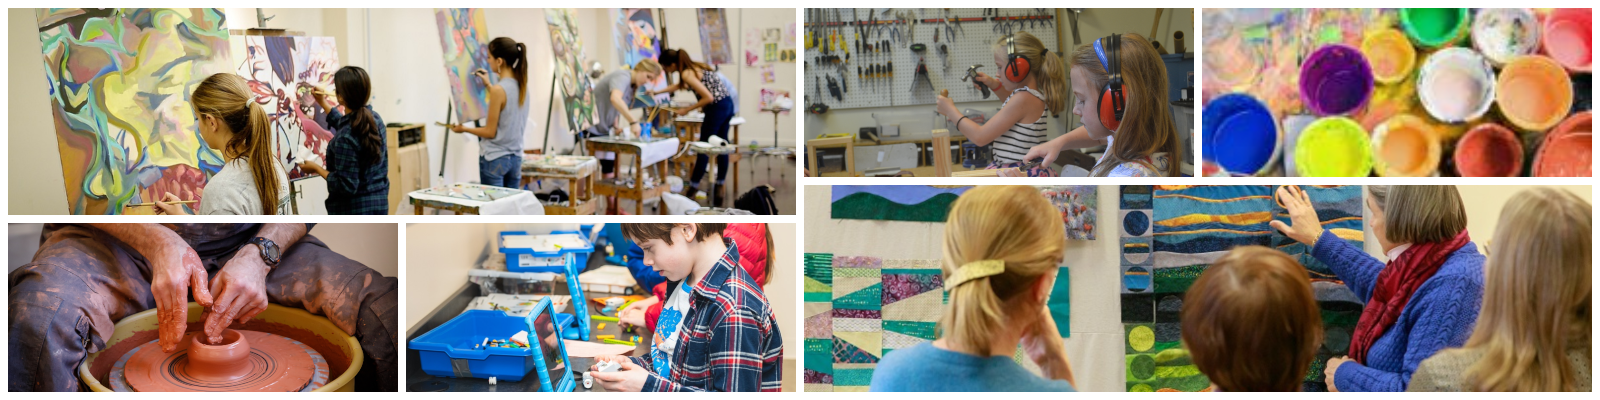 Arts Education Classes for Adults, Teens and Youth -- All Levels of Experience